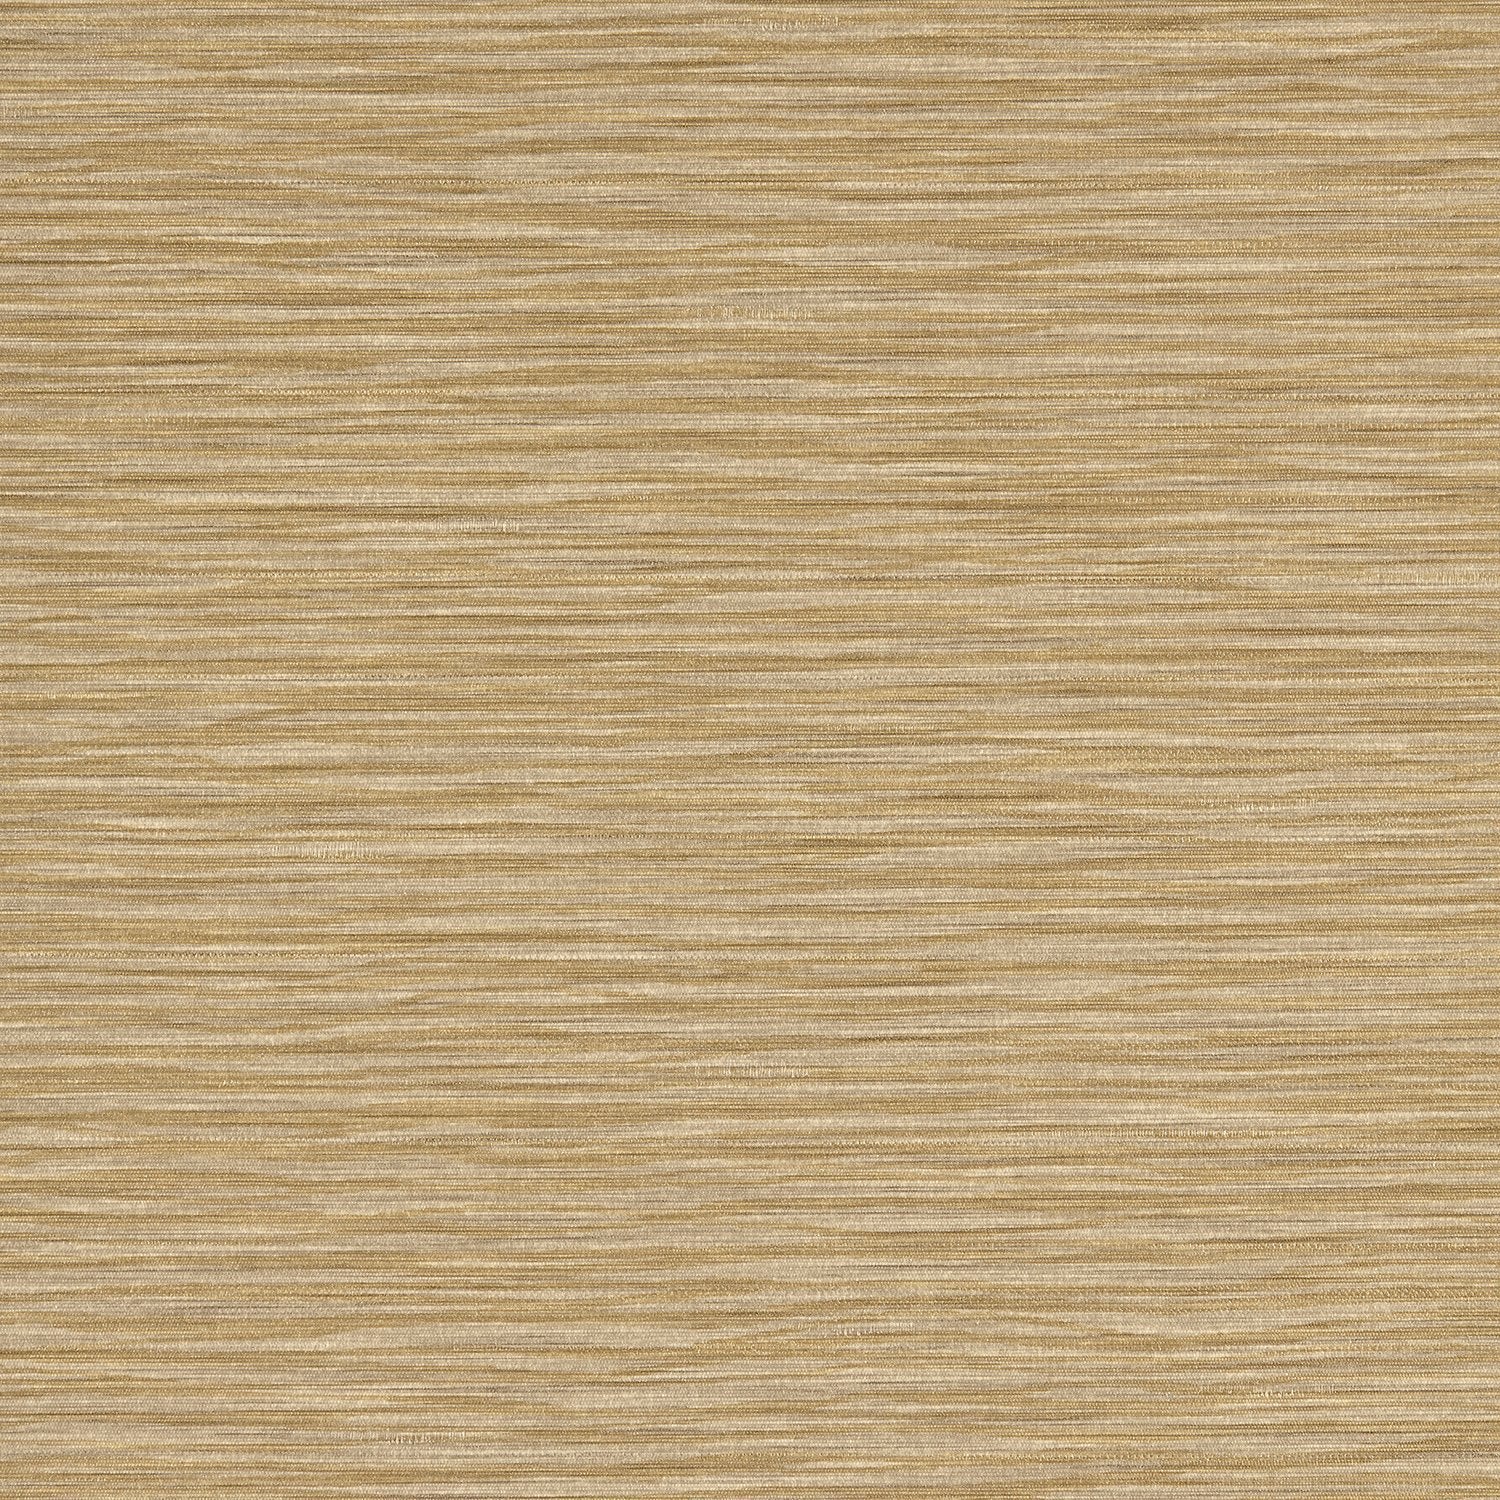 Twine - Y47264 - Wallcovering - Vycon - Kube Contract